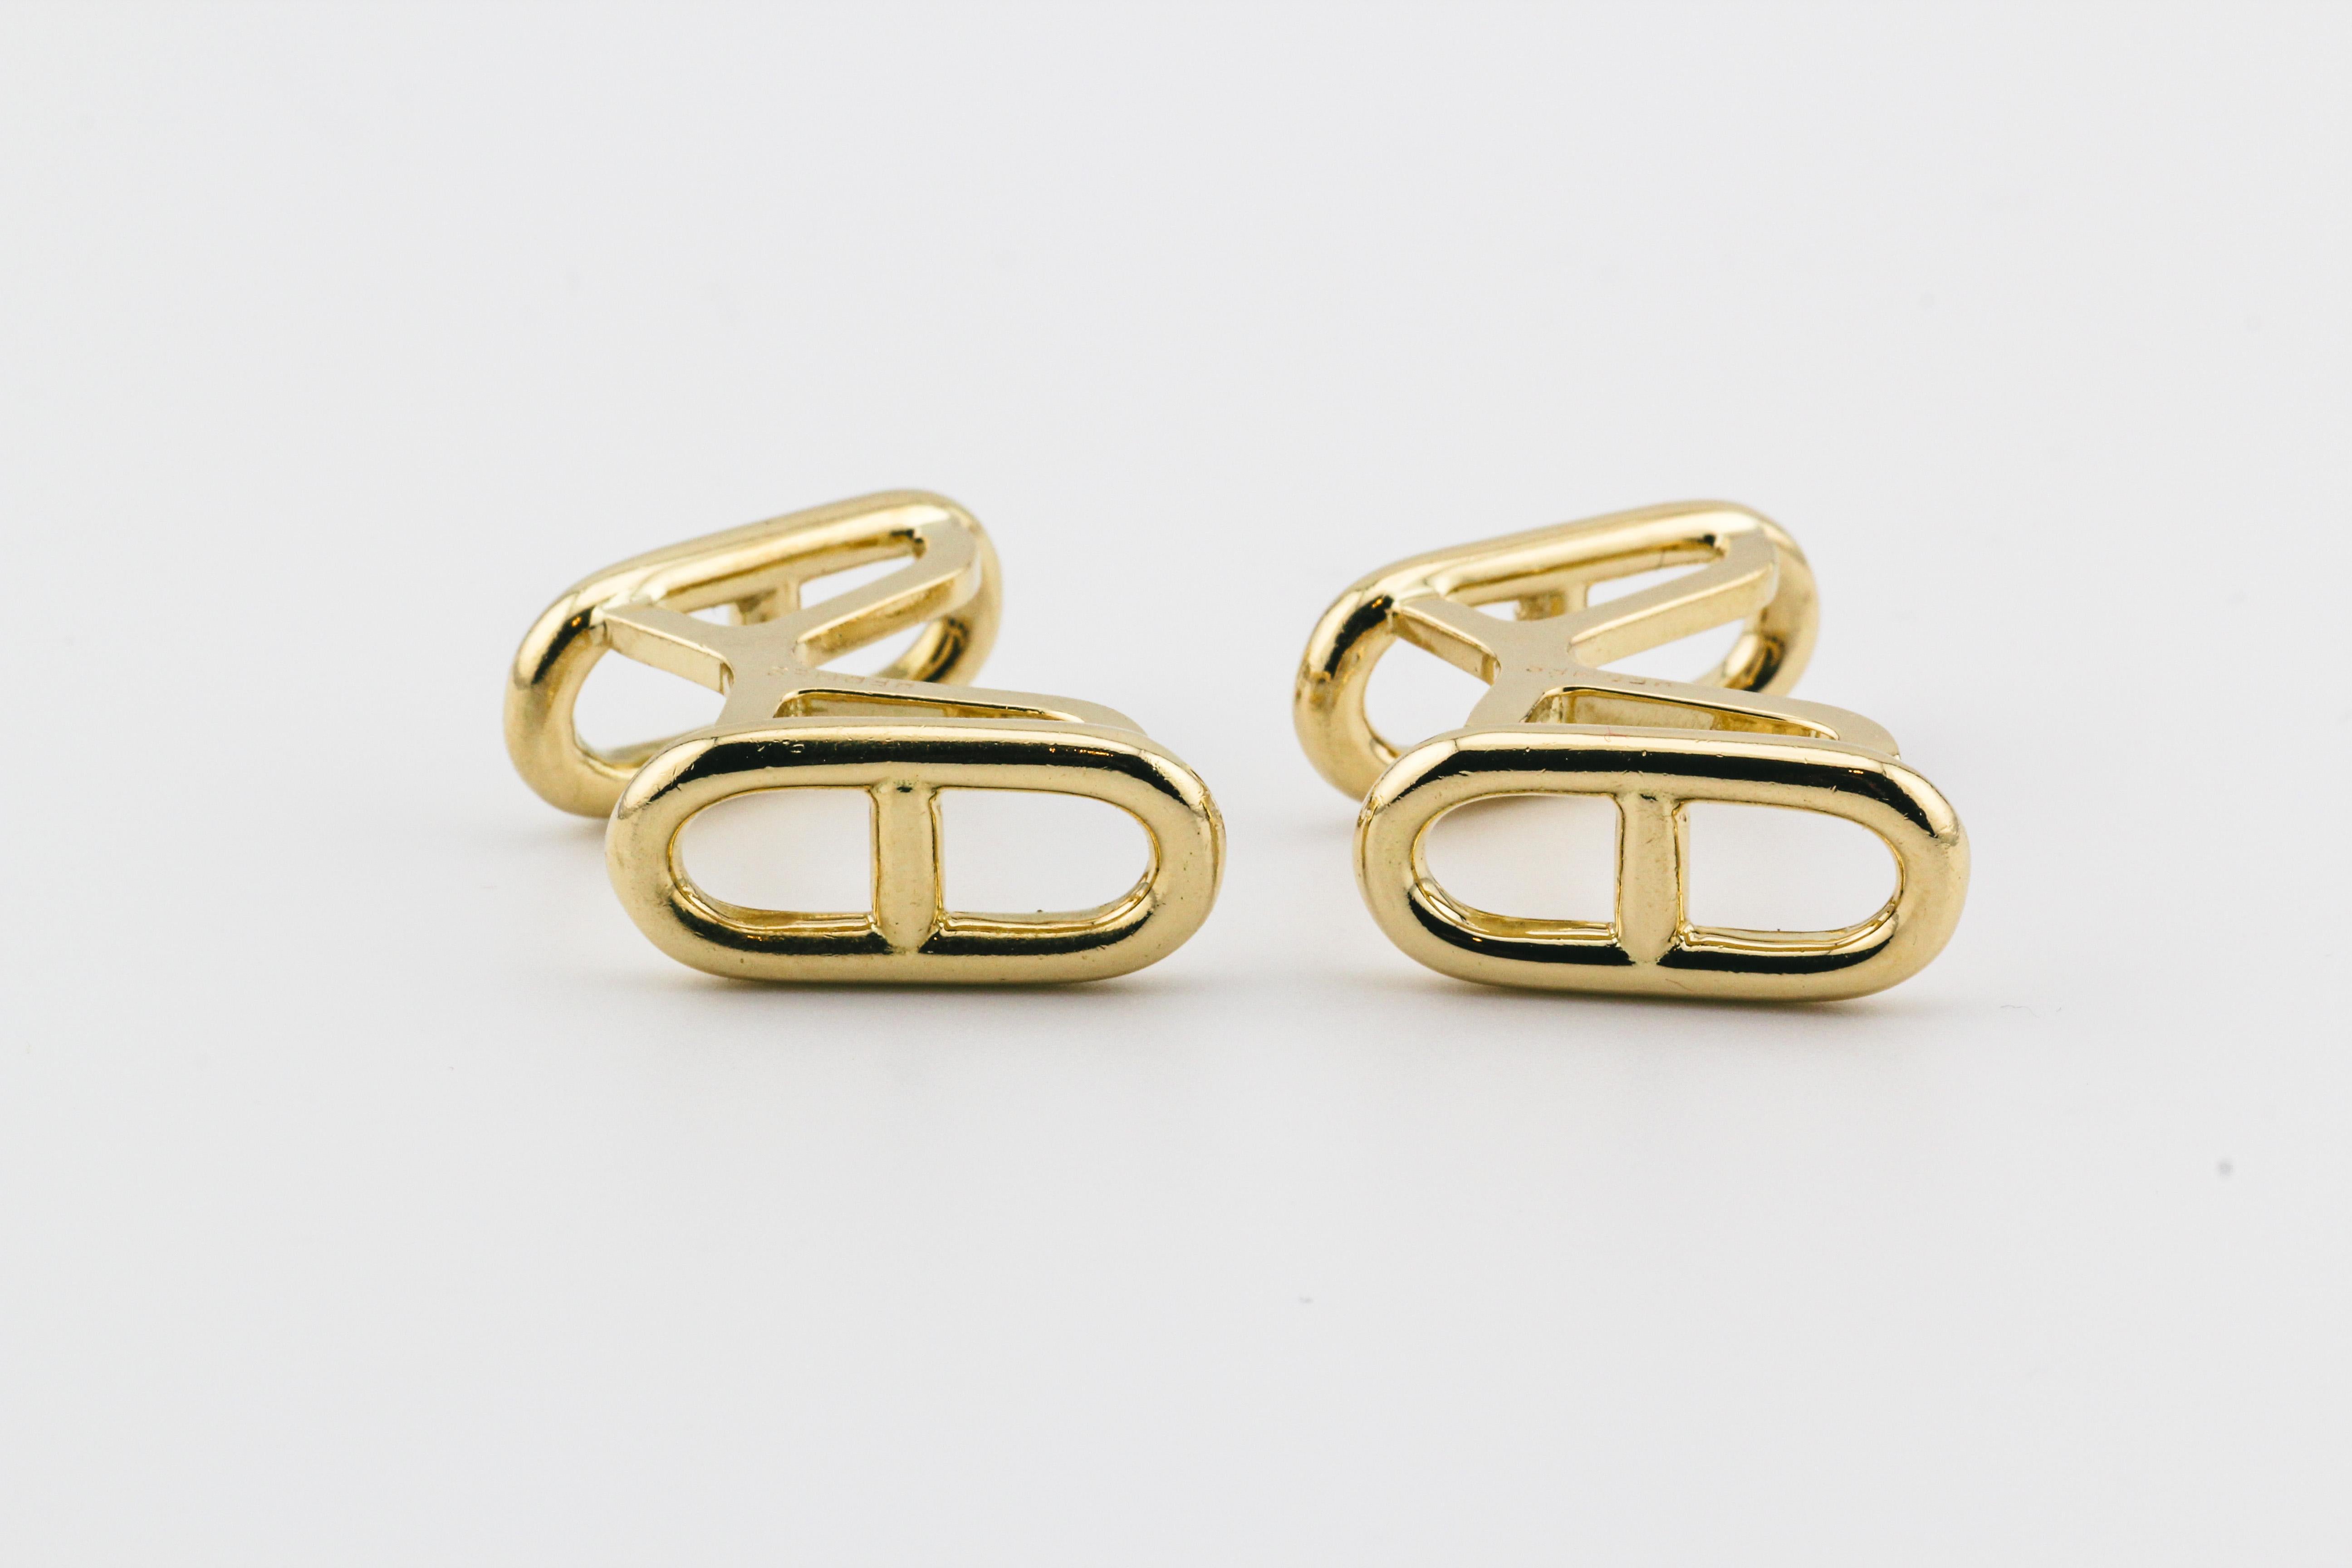 Hermes Vintage 1970s Chaine D'Ancre 18k Gold Cufflinks In Good Condition For Sale In Bellmore, NY